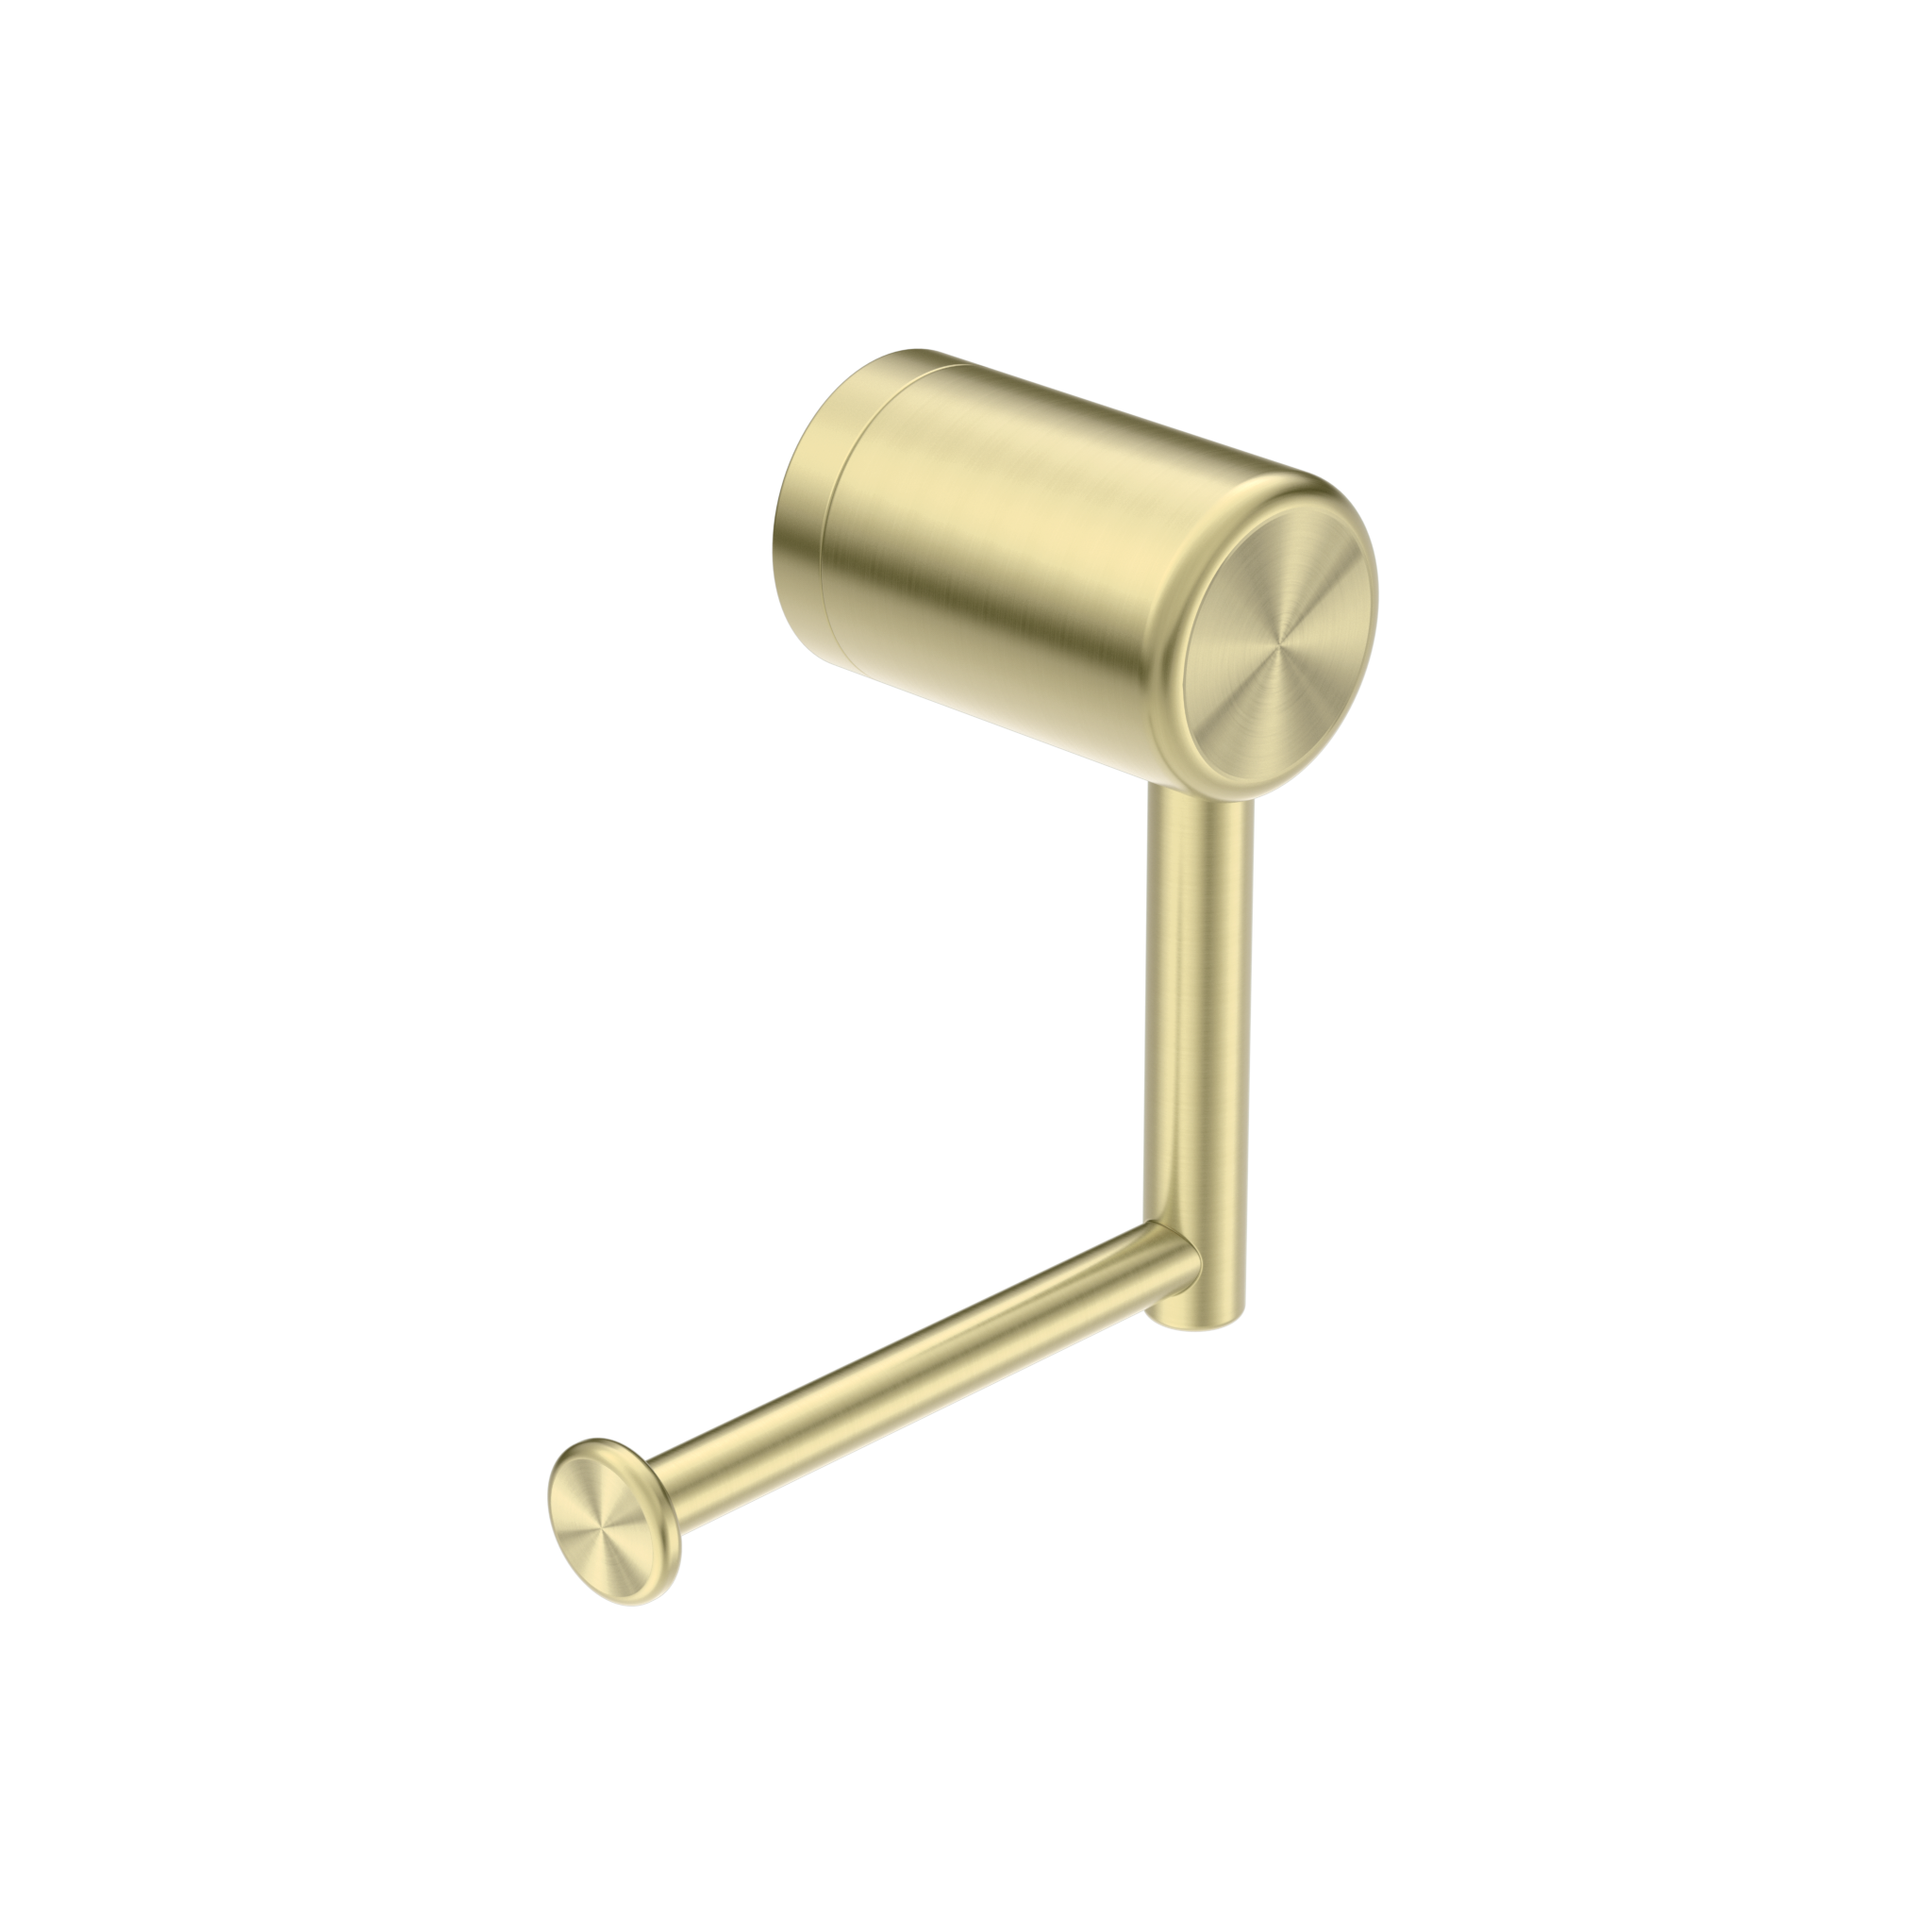 CALIBRE MECCA HEAVY DUTY TOILET ROLL HOLDER BRUSHED GOLD